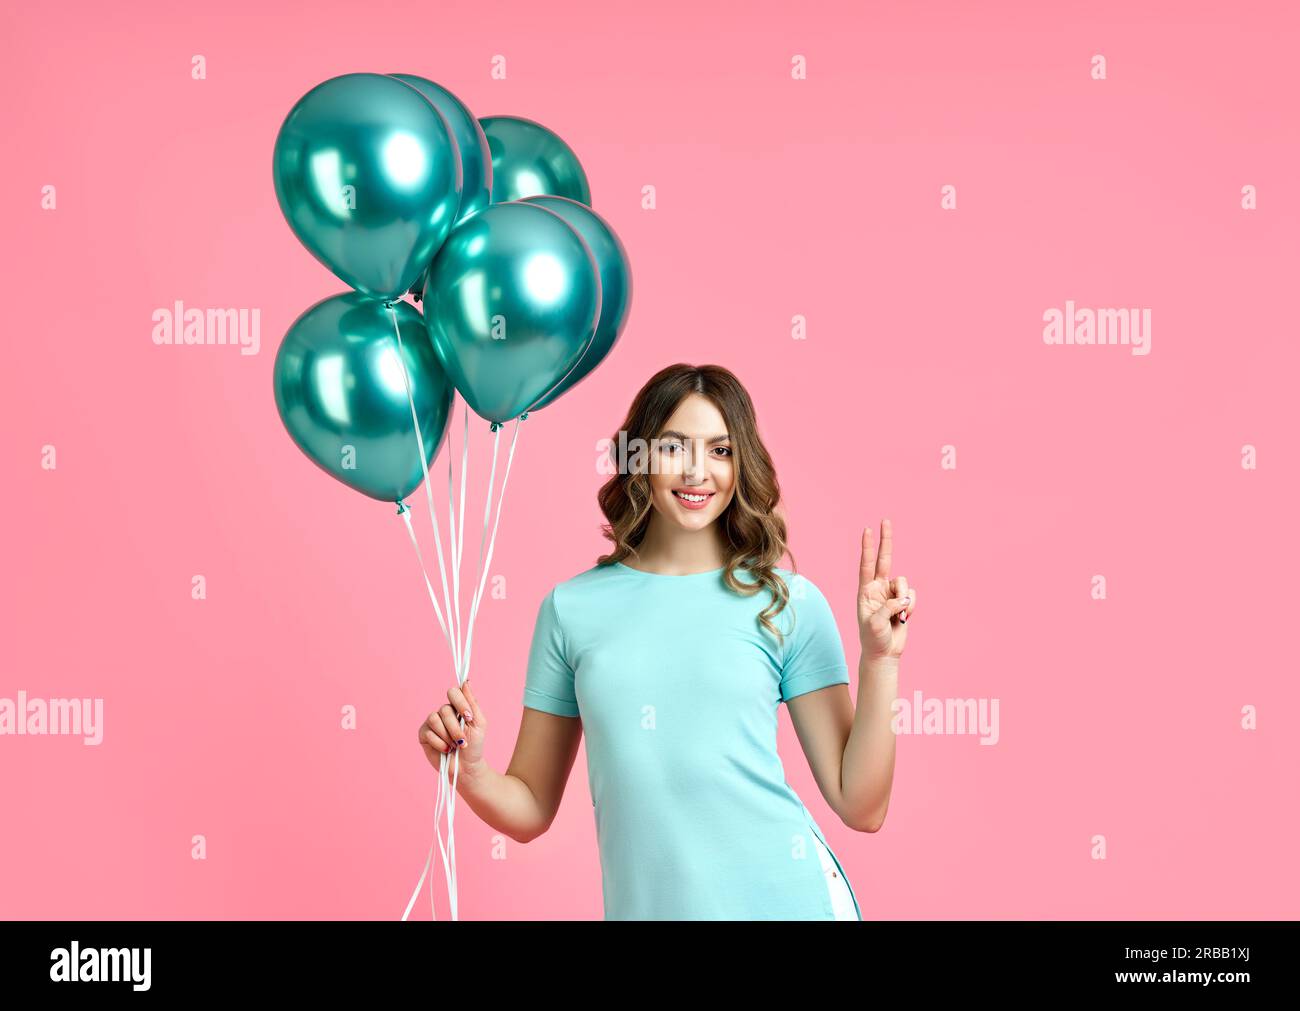 Happy pretty woman with blue balloons in hands doing victory sign on pink background. party concept Stock Photo